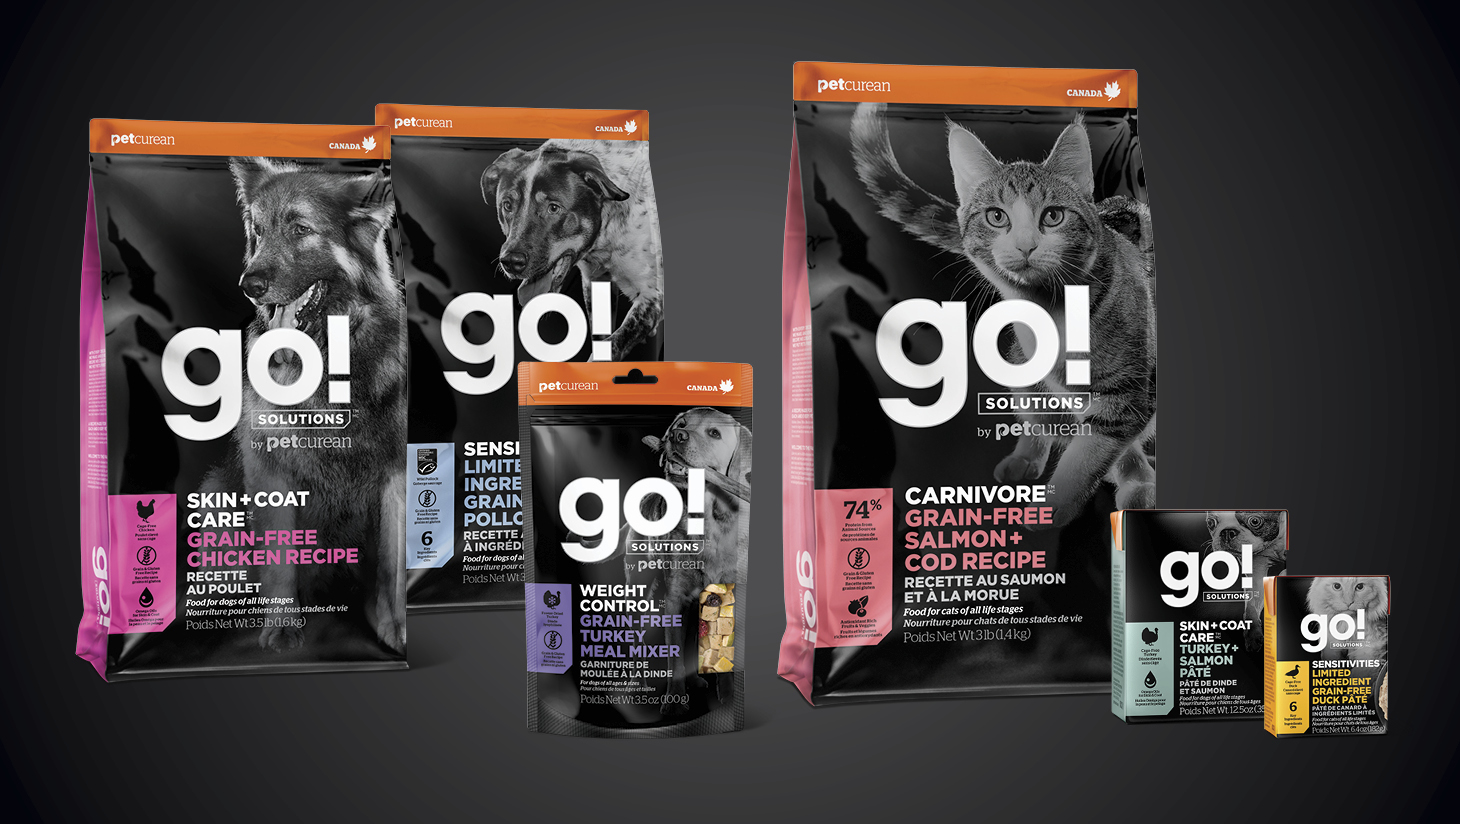 Subplot Design Inc and Petcurean Cook Up New Packaging for Go! Solutions